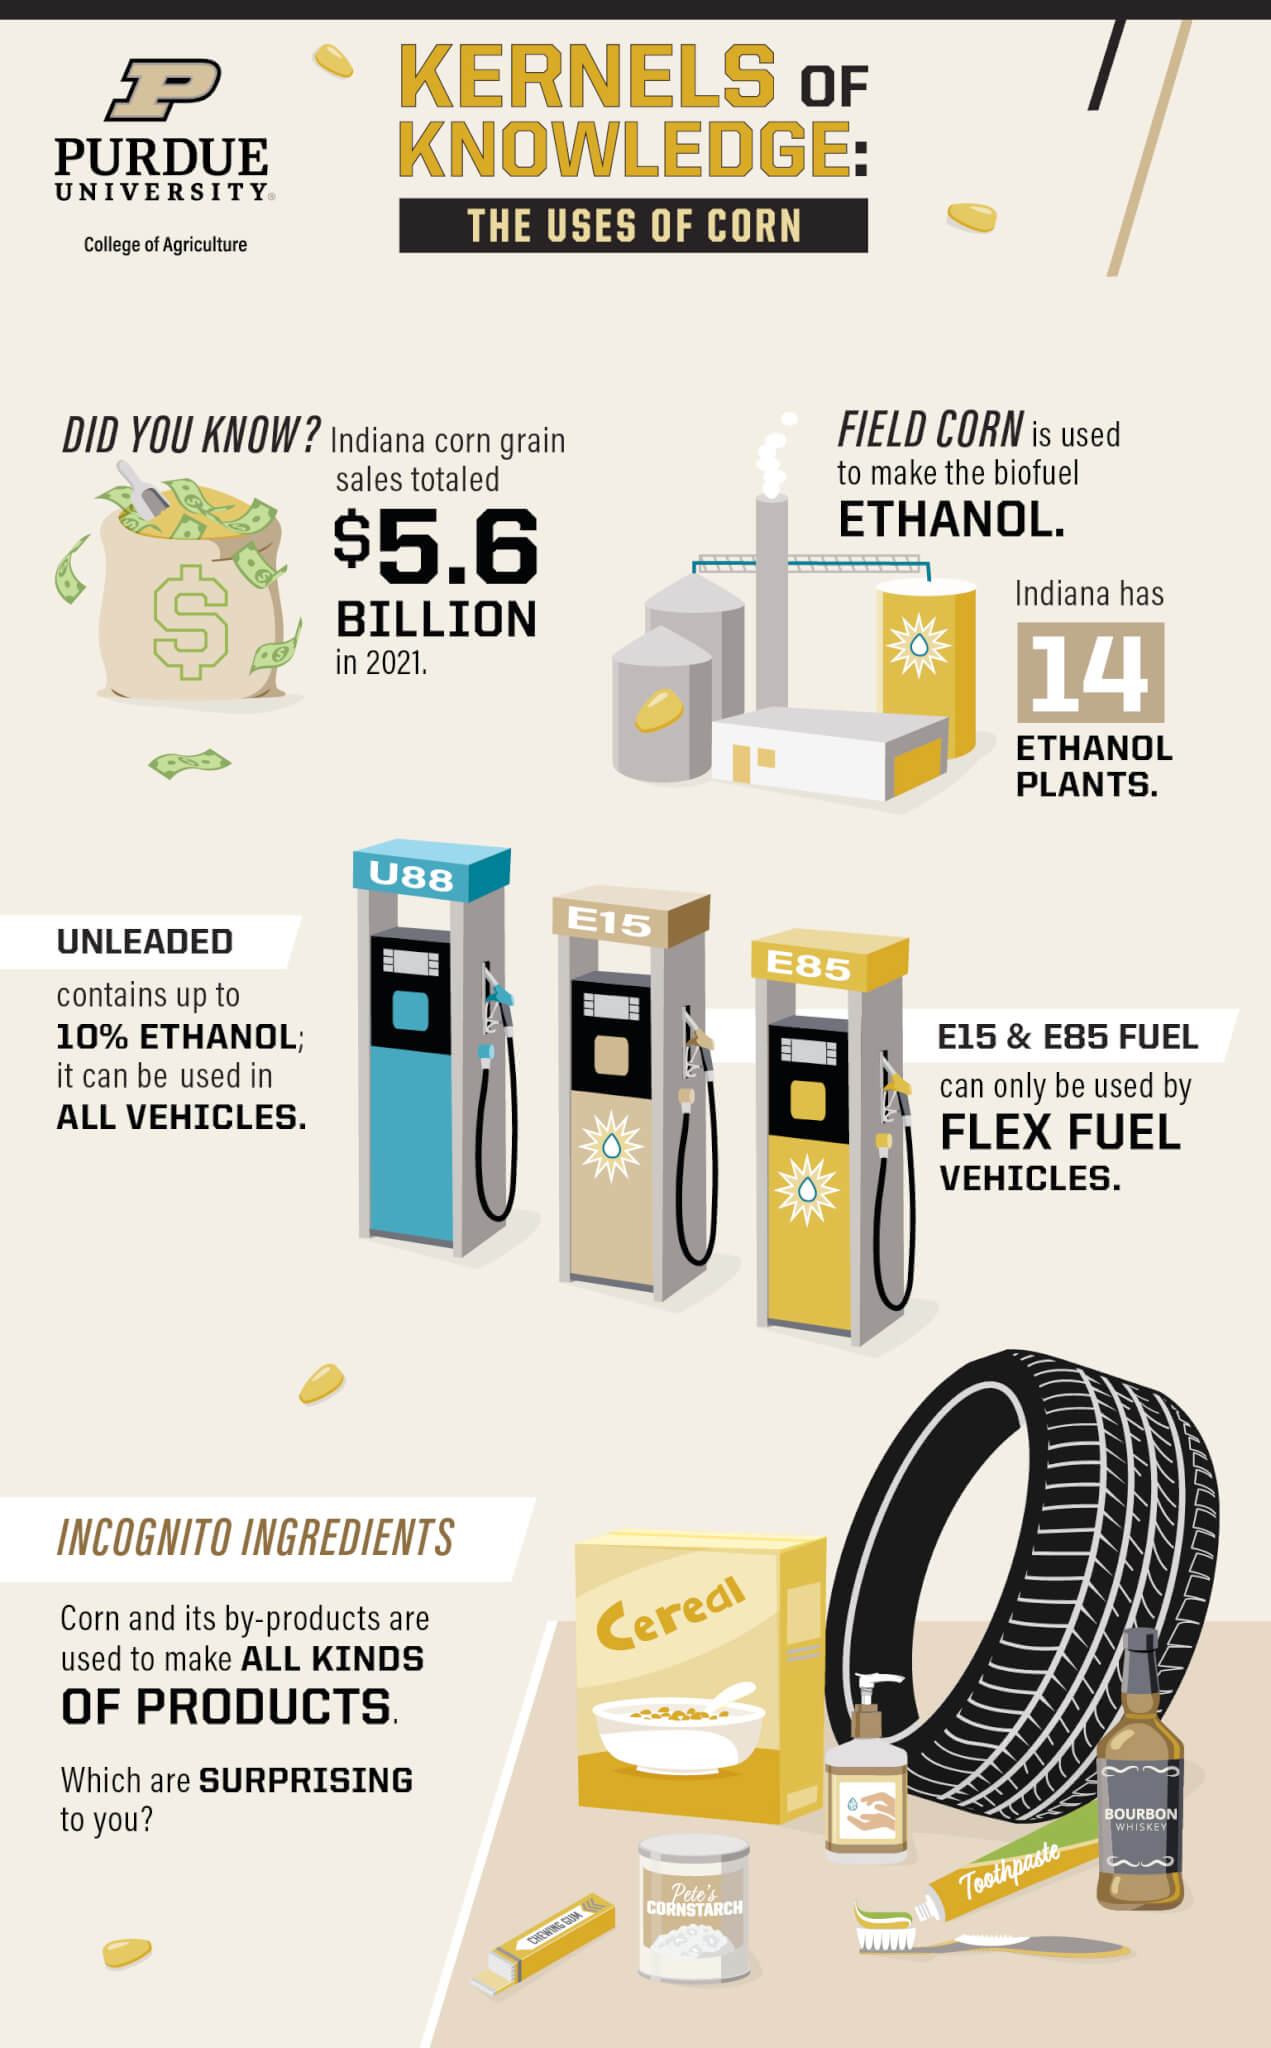 kernels of knowledge: uses of corn infographic